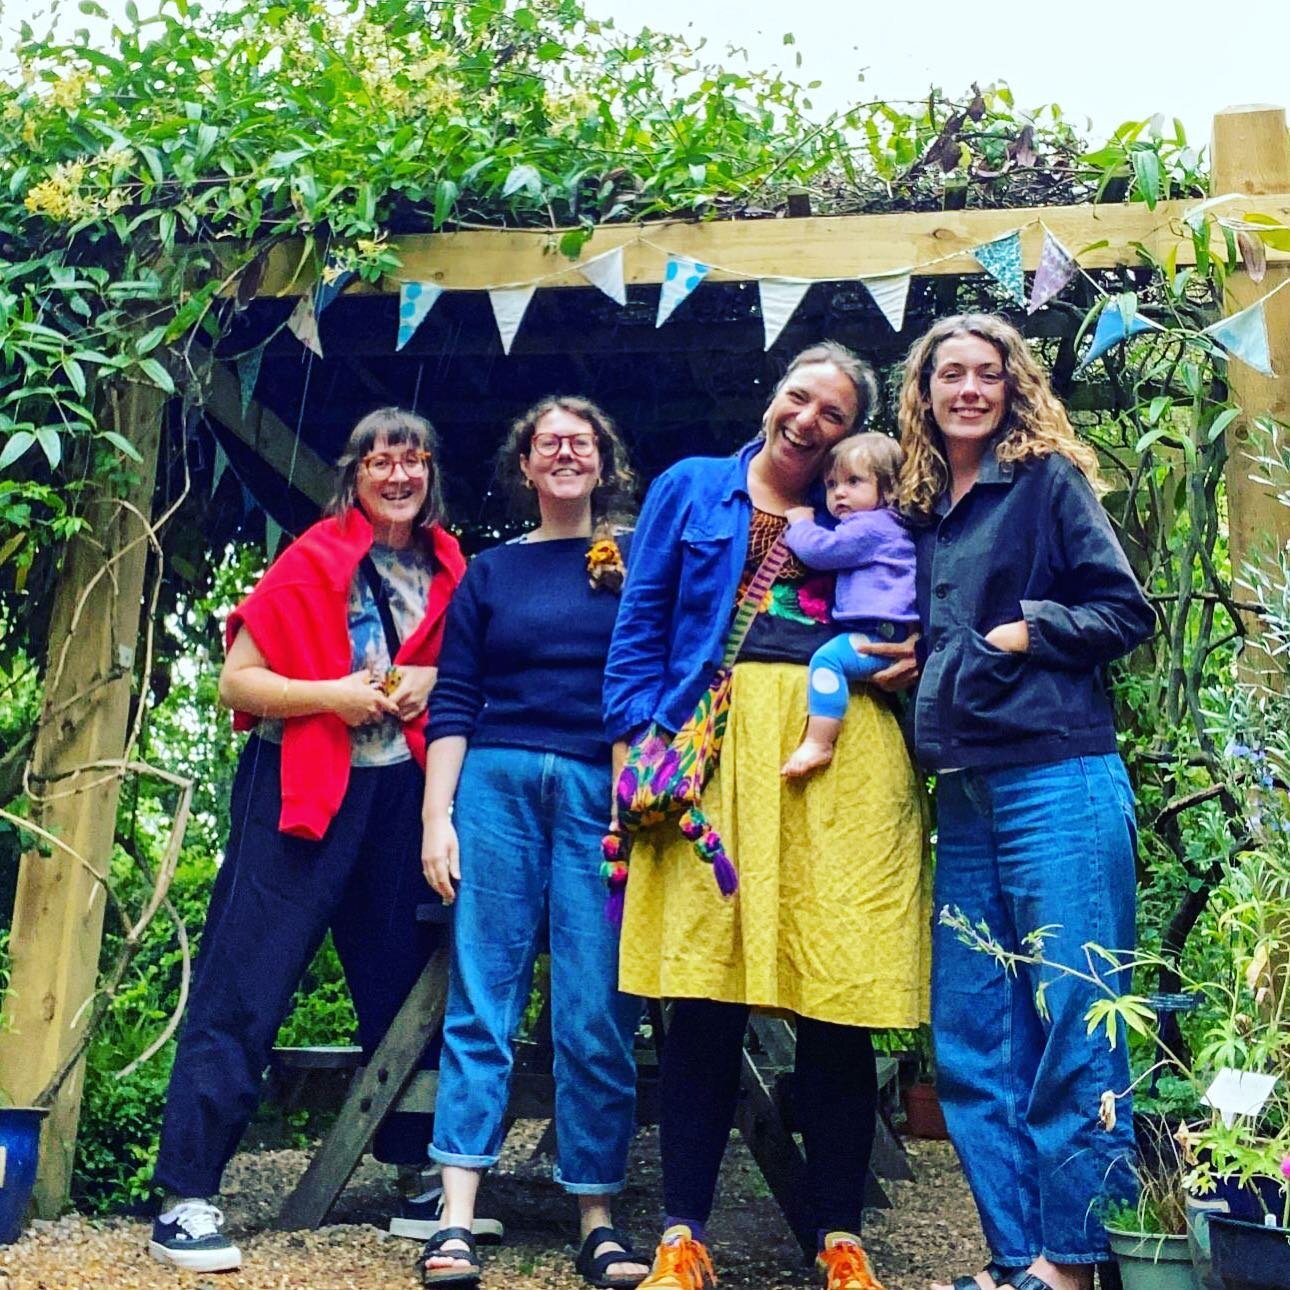 Hello friends of the Broads 🌻 We have had a little break and there&rsquo;s also new baby Broad! This weekend we had a wonderful catch up in Norfolk &amp; rehearsed some new songs. Excited to play @folkeast on Saturday 19th August. Hope to see some o